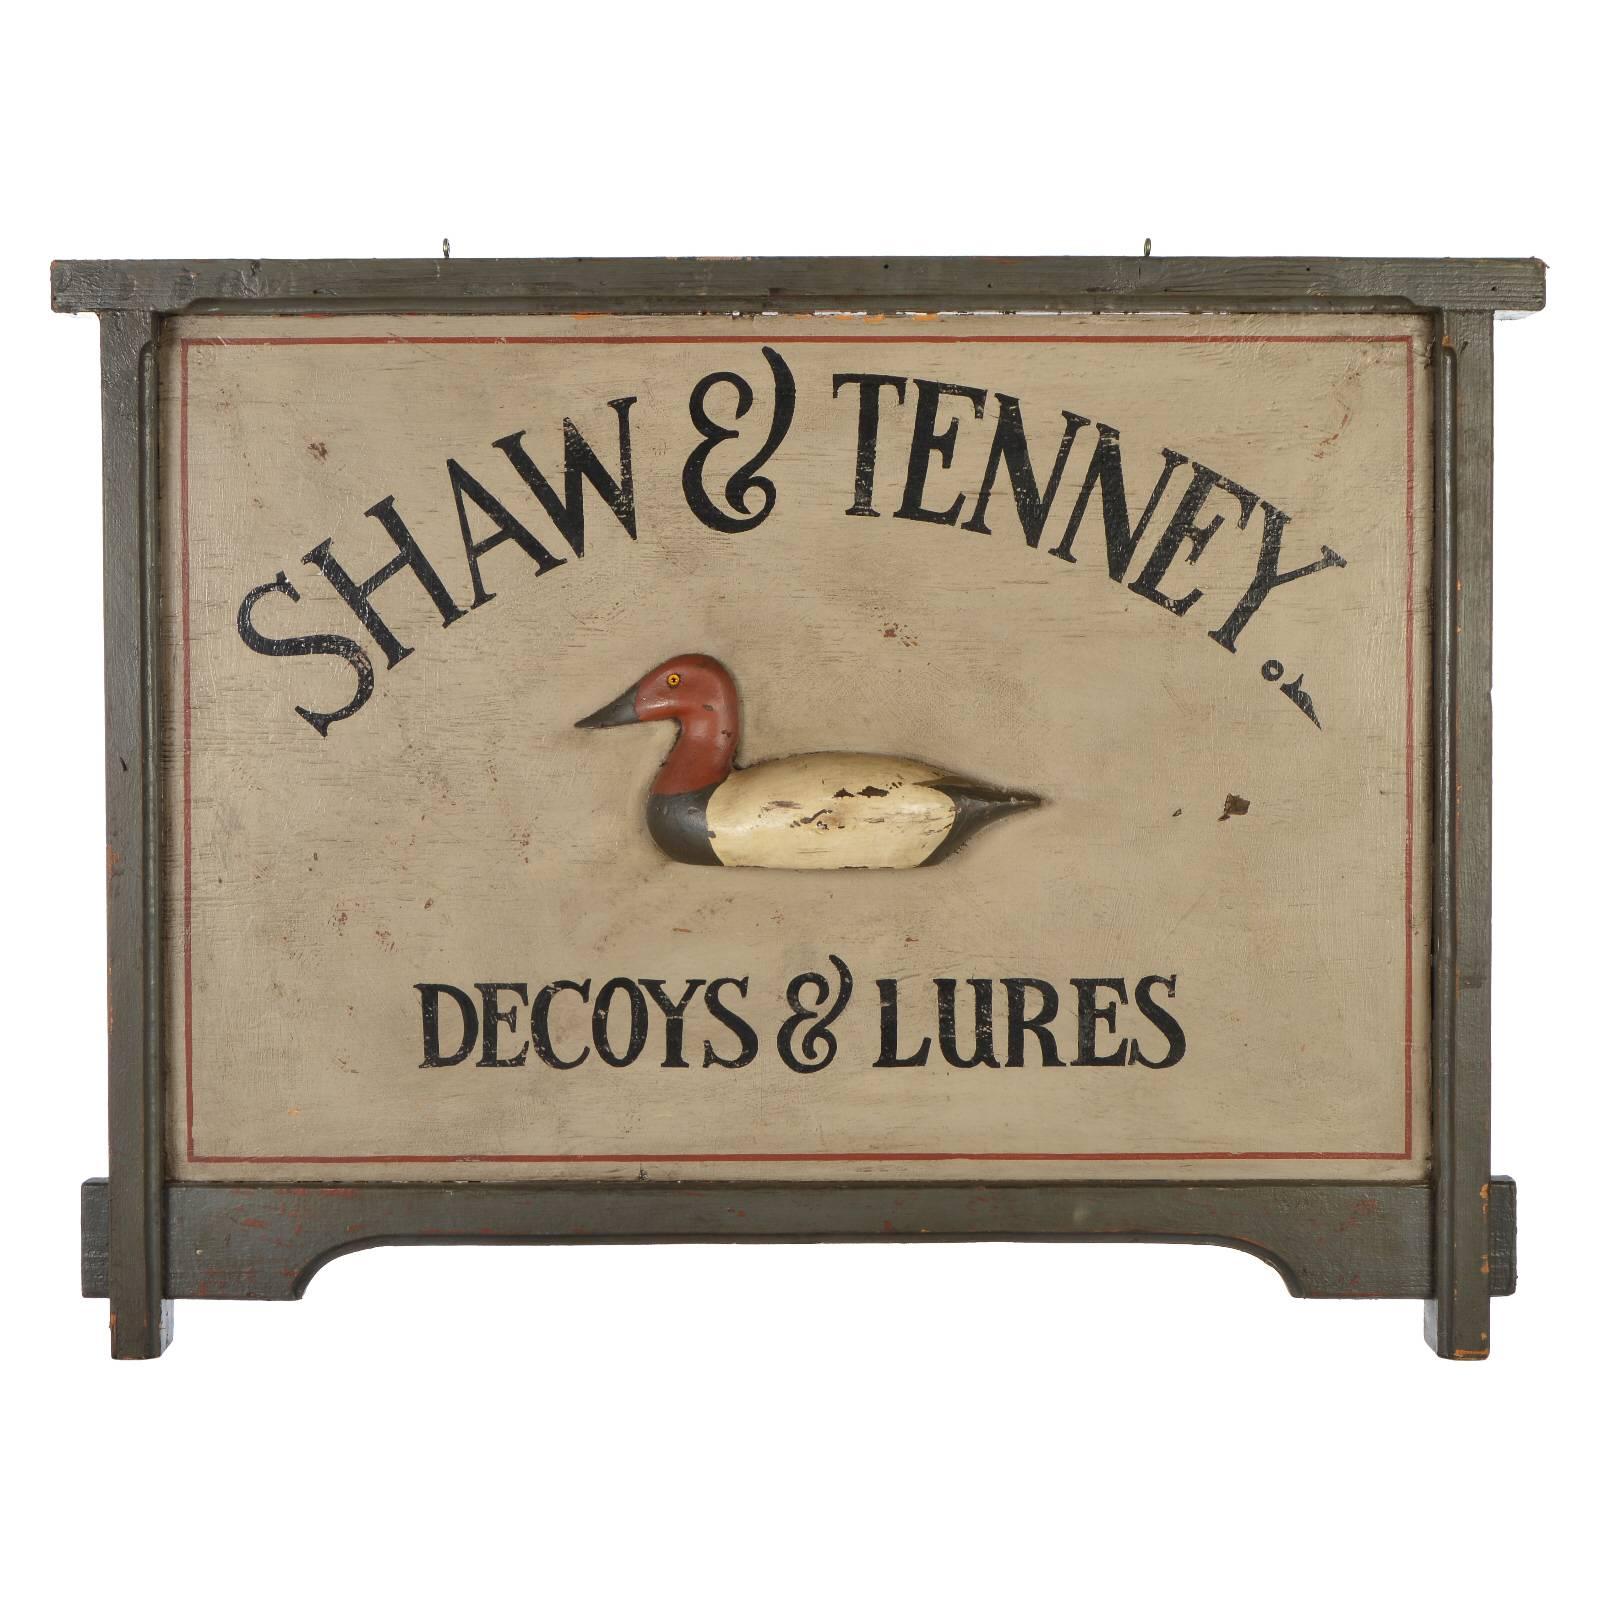 Shaw and Tenney Decoys and Lures Trade Sign For Sale